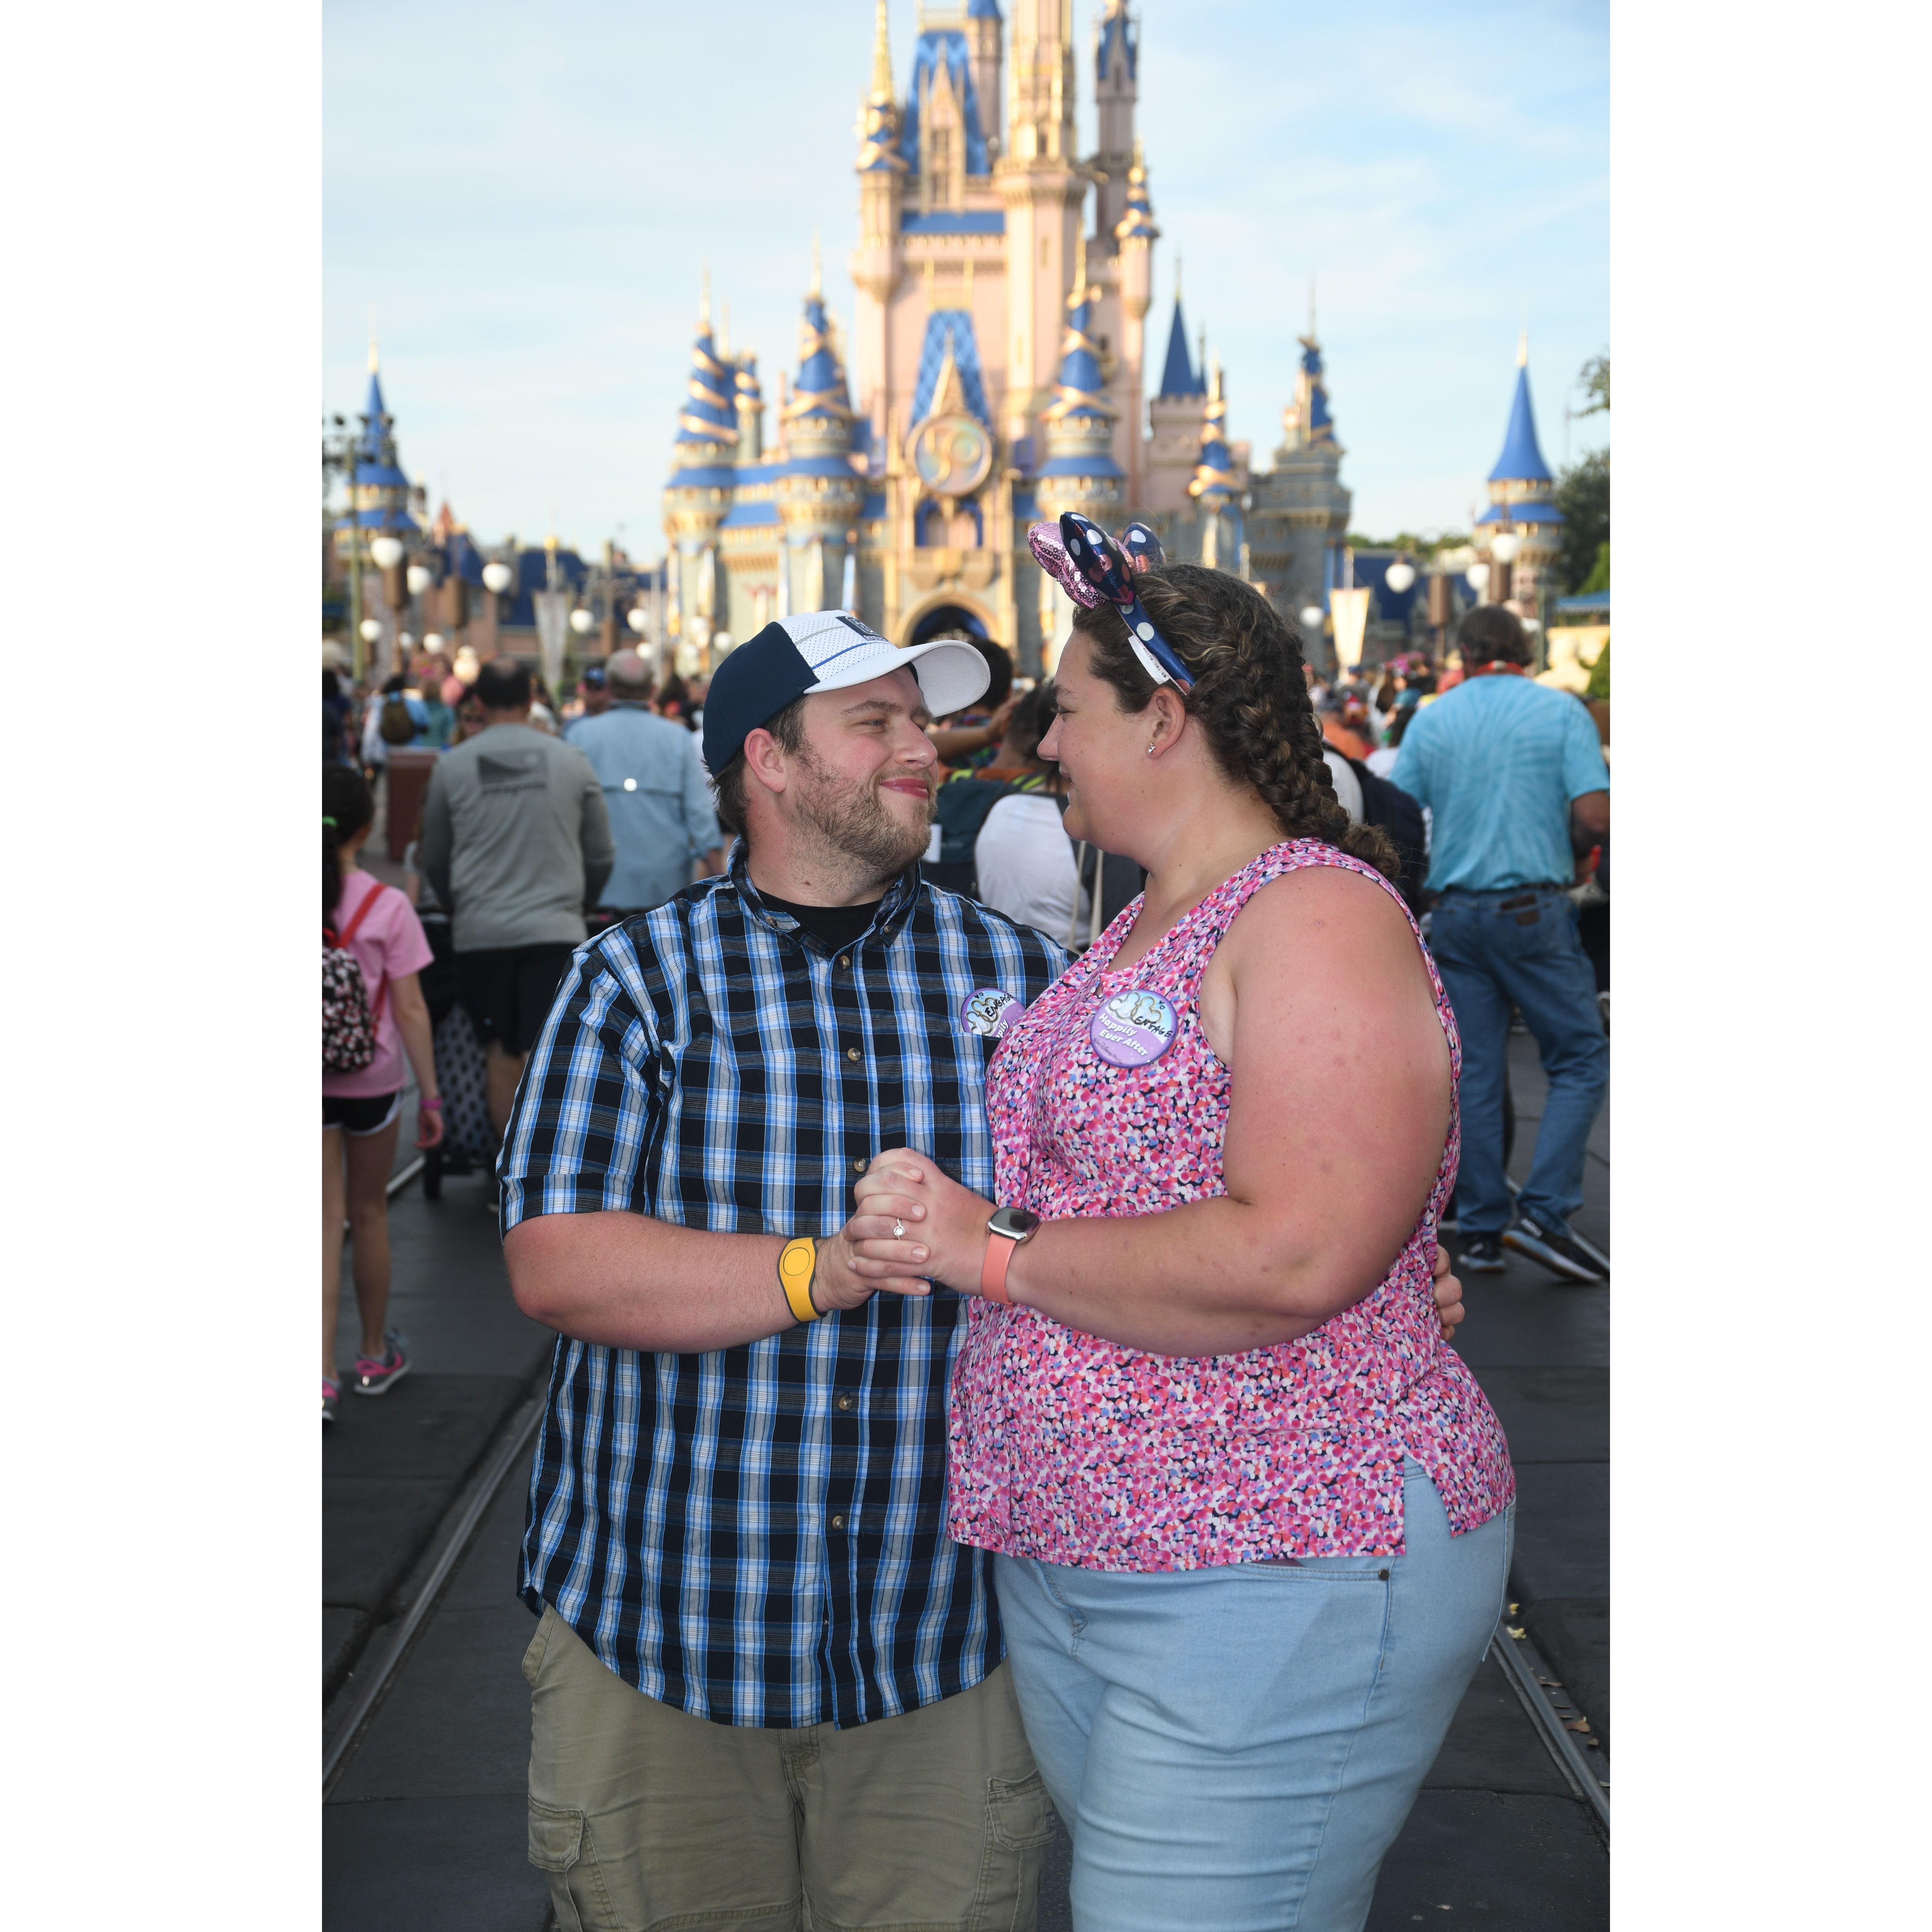 Disney trip after getting engaged in 2021